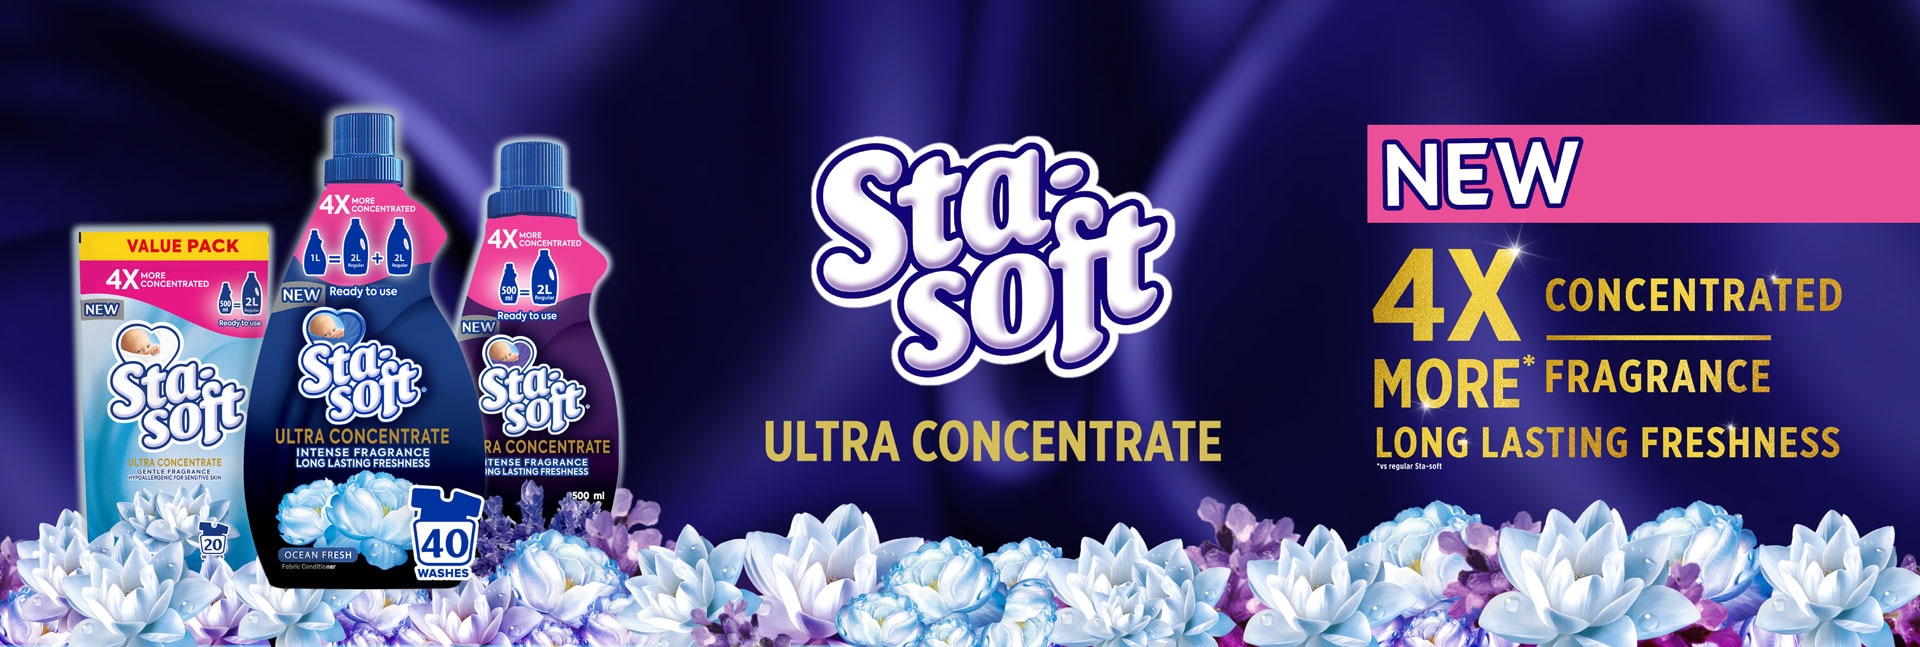 Sta-soft Ultra Concentrate Bottom Banner